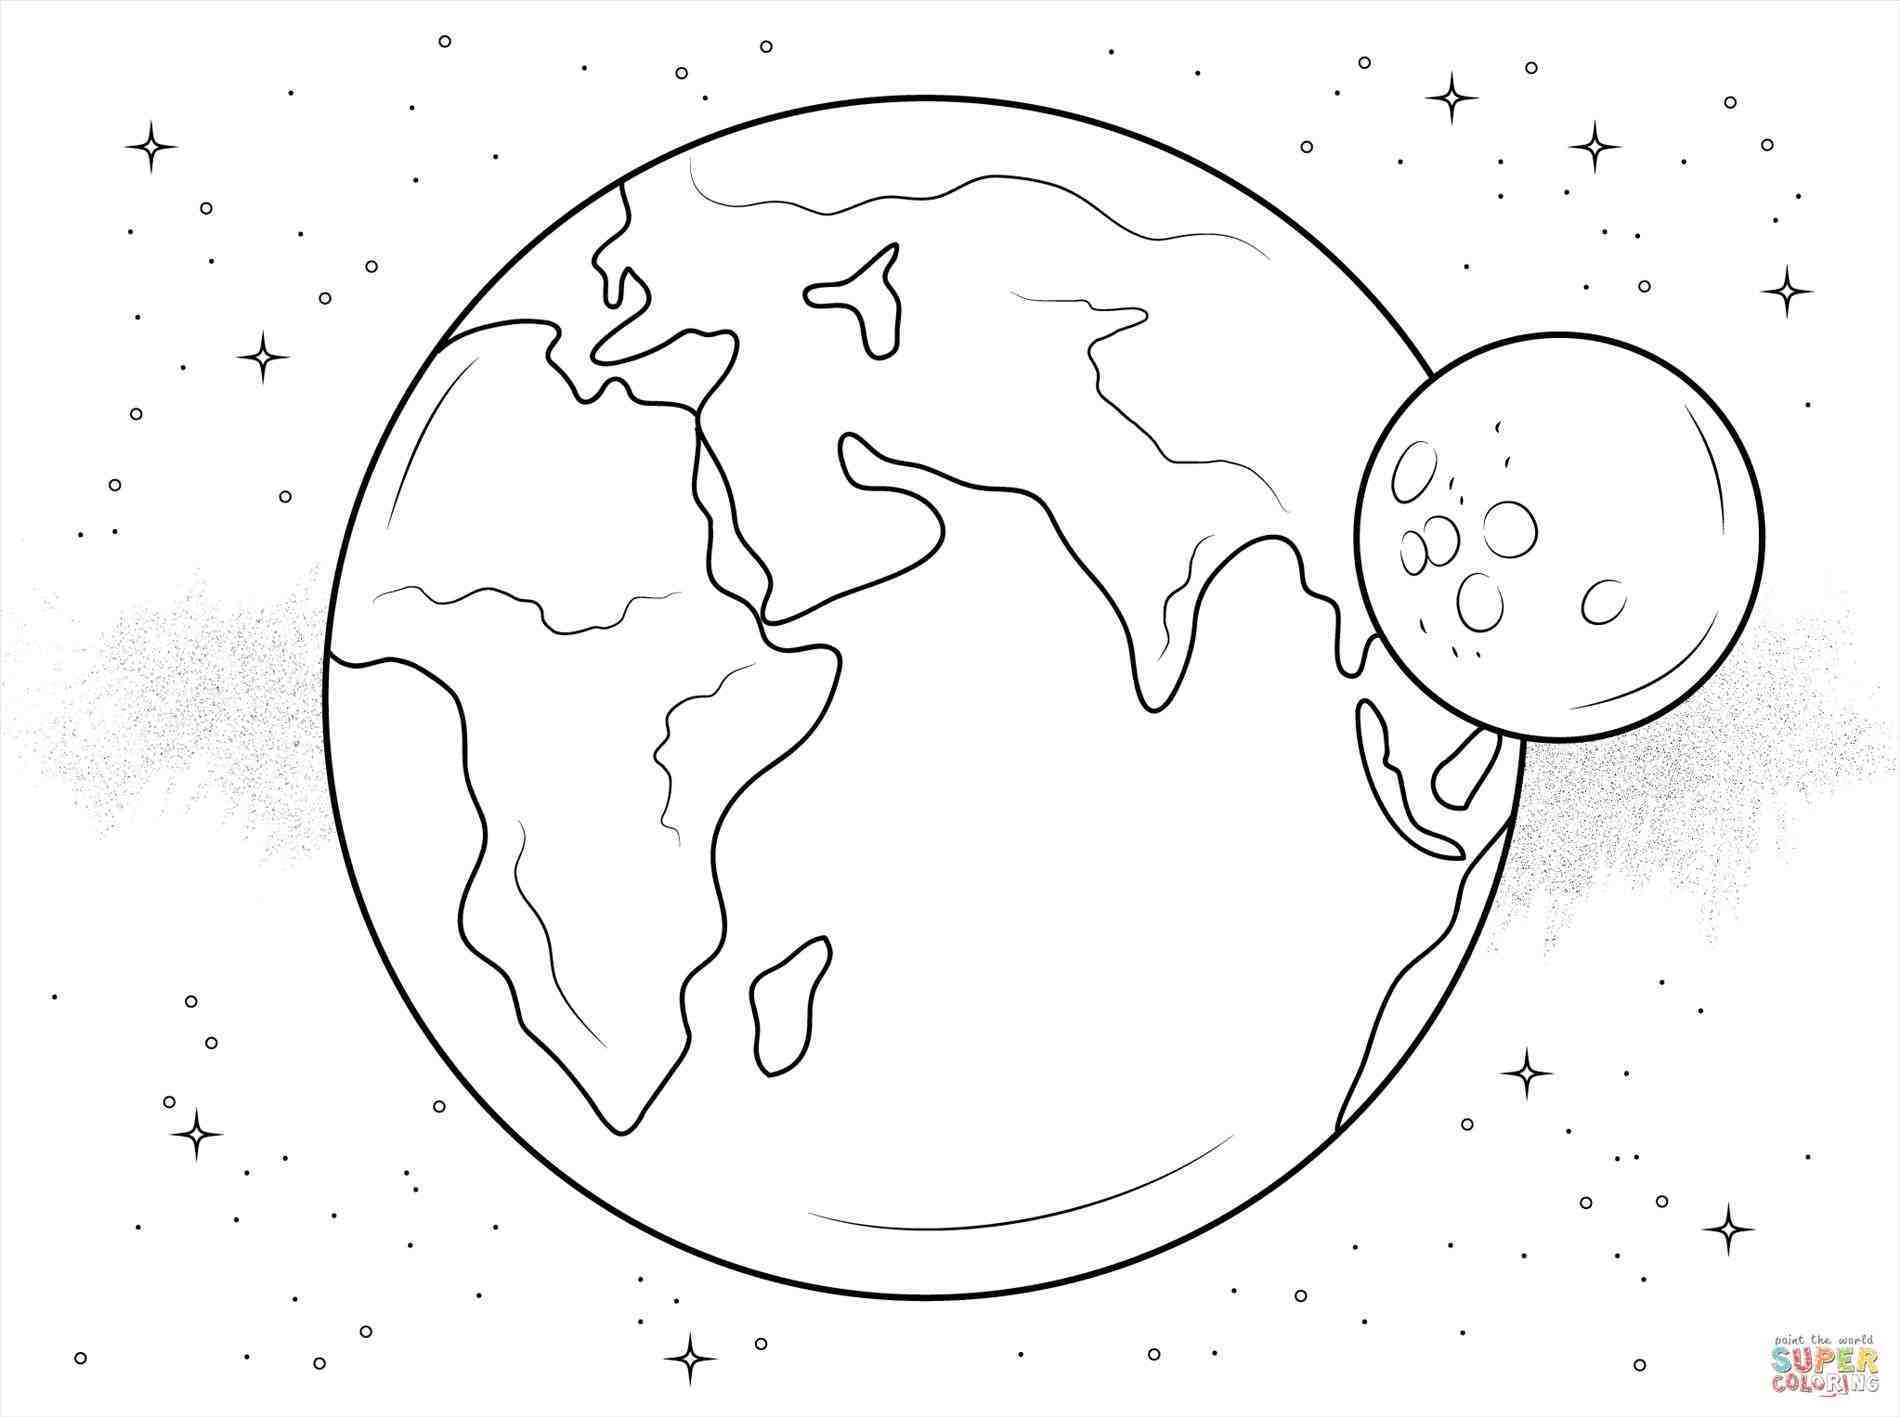 Cartoon Earth Coloring Pages at GetColorings.com | Free printable